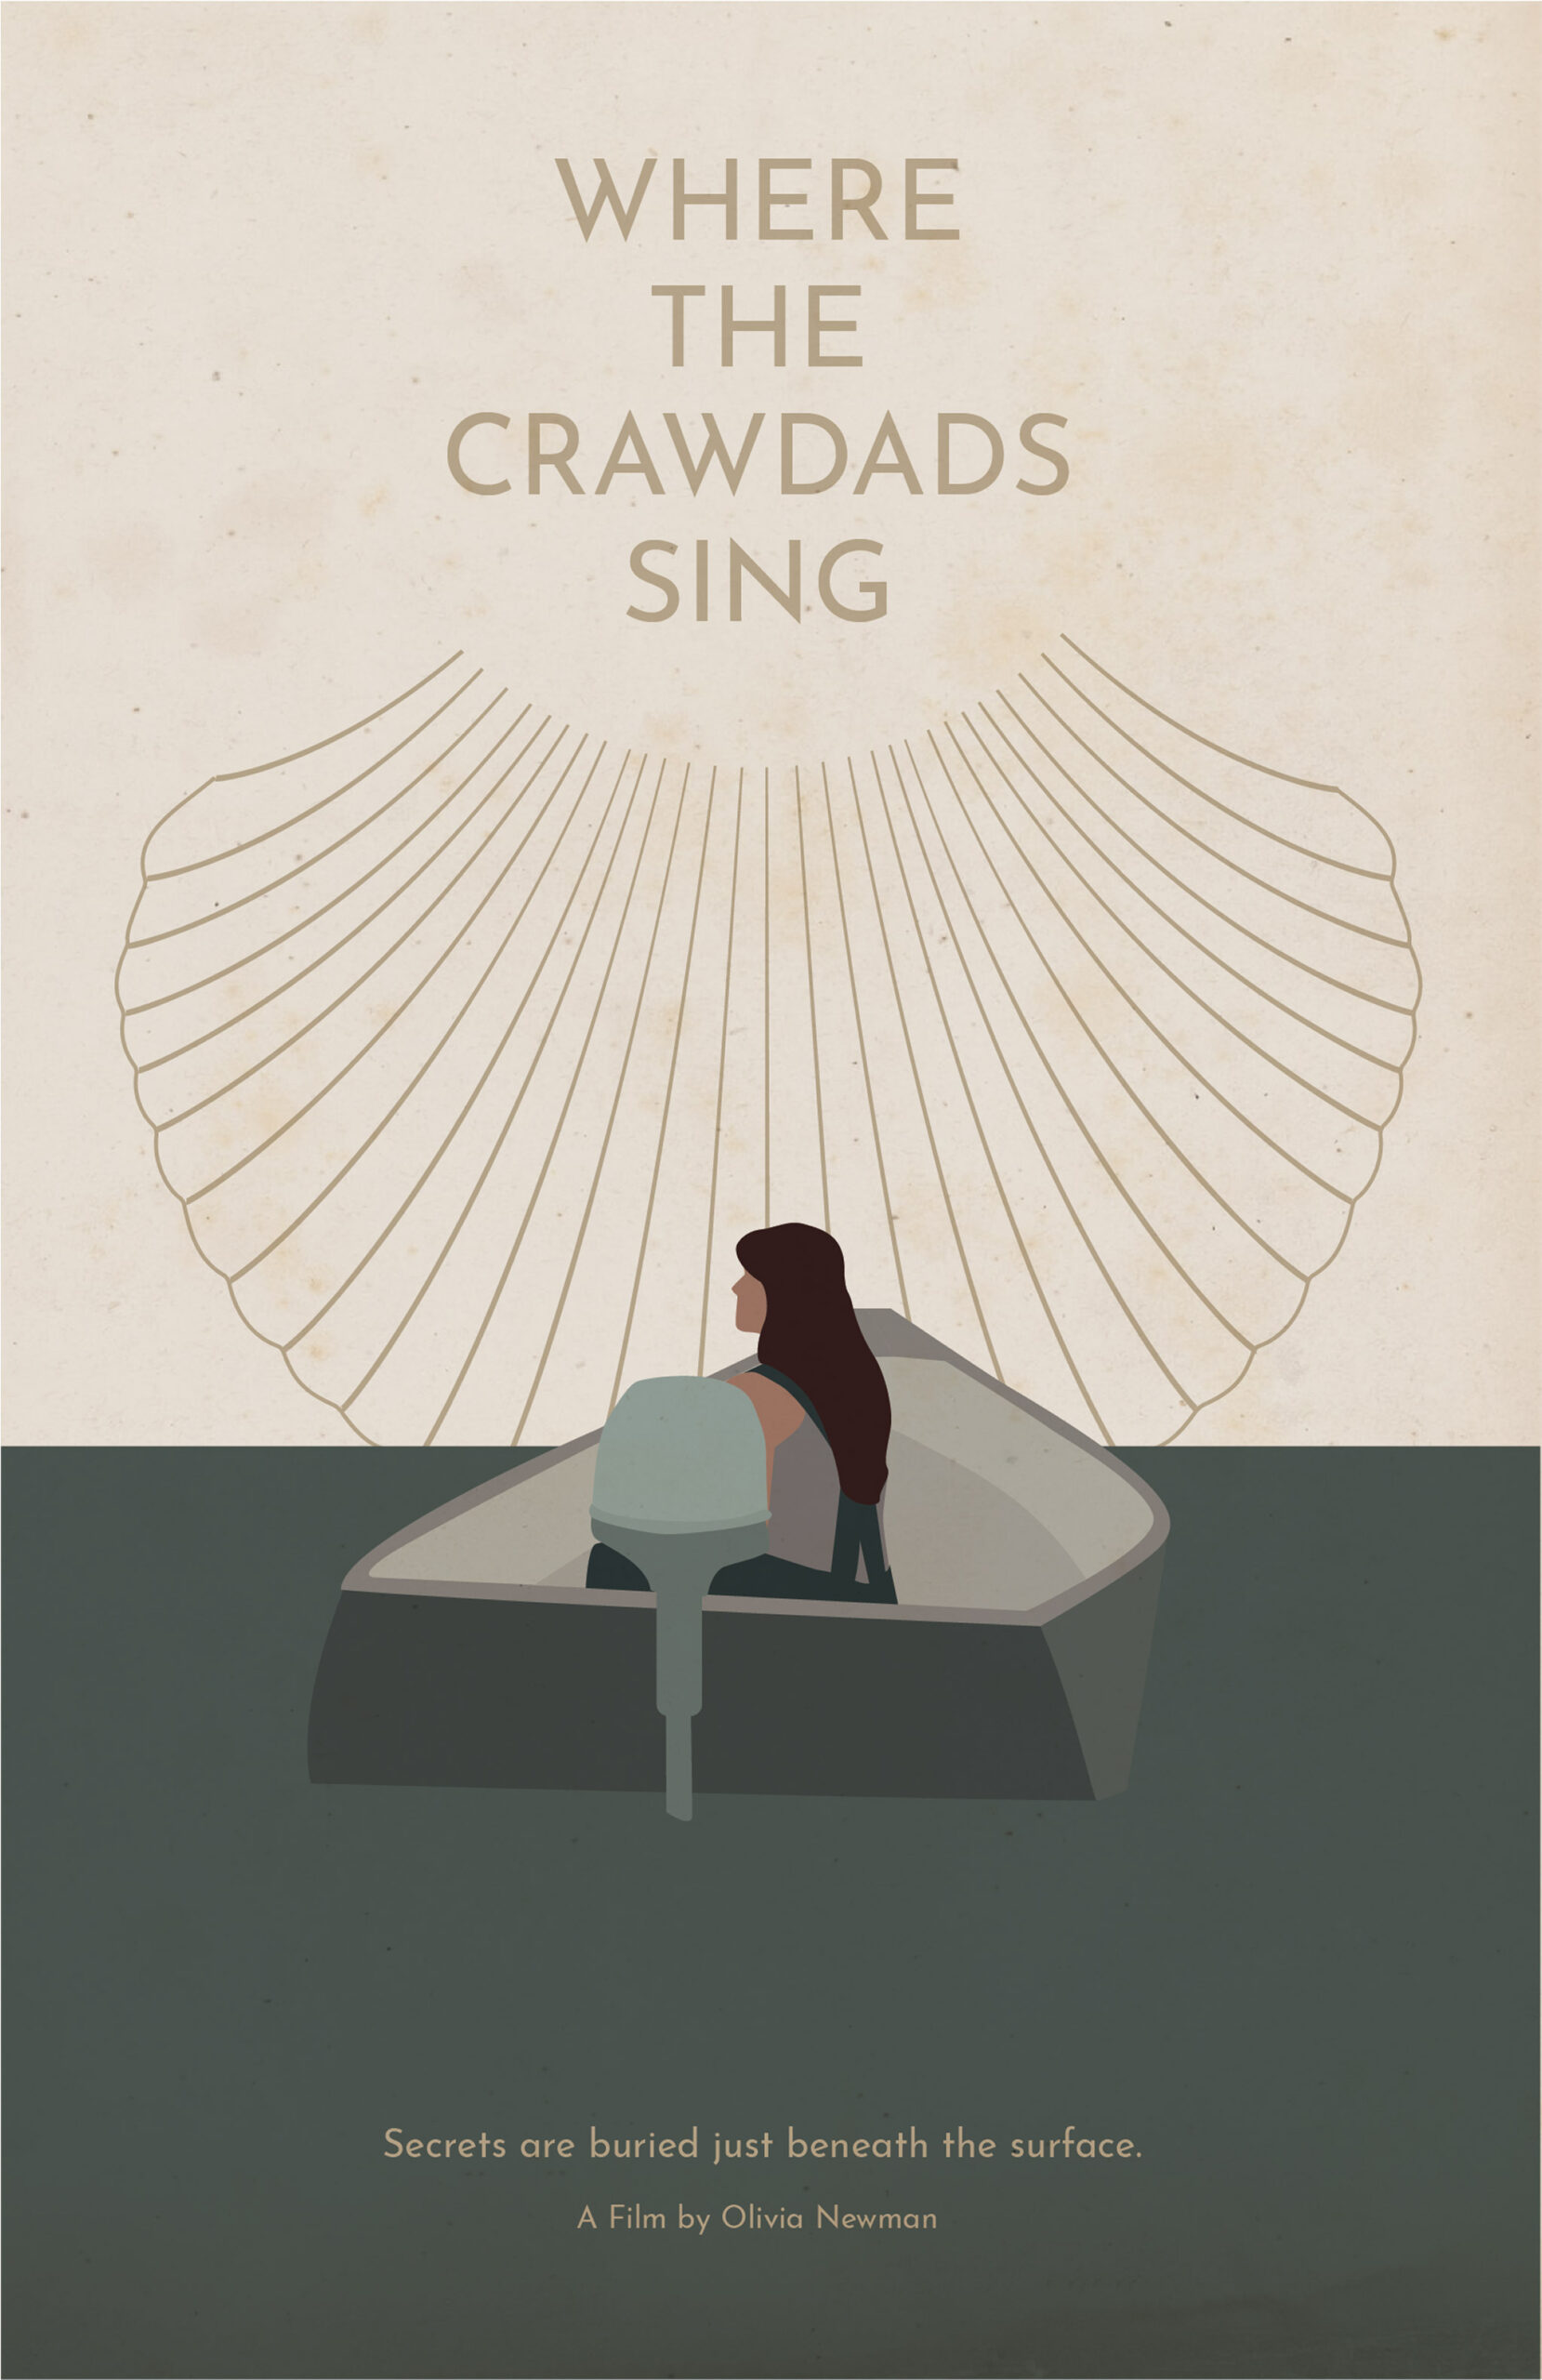 Movie poster illustration design for Where The Crawdads Sing. Illustration displays a girl in a fishing boat with a silhouette of a seashell in the back.